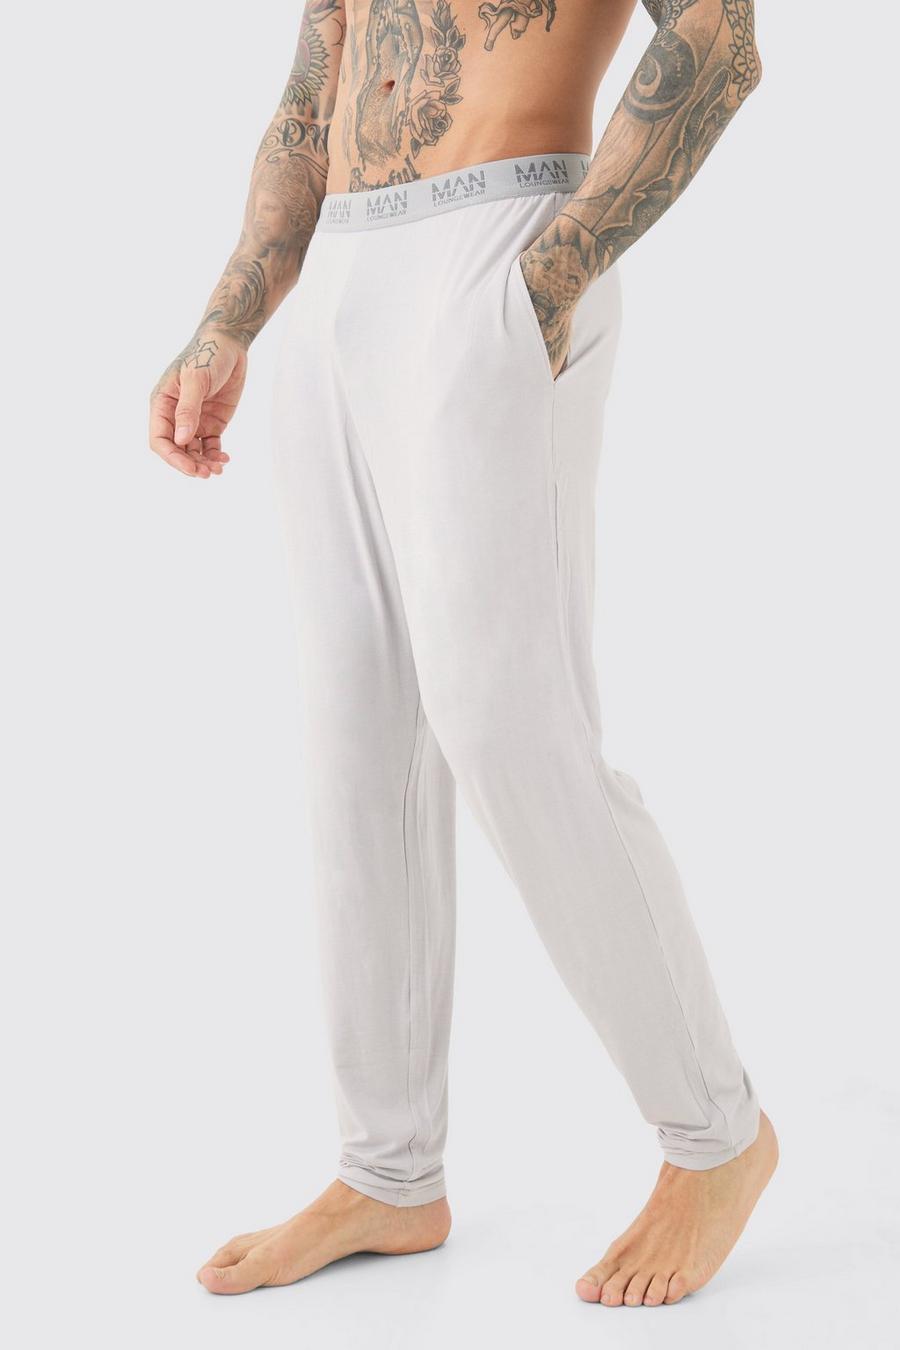 Ash grey Tall Premium Modal Mix Relaxed Fit Lounge Bottoms image number 1